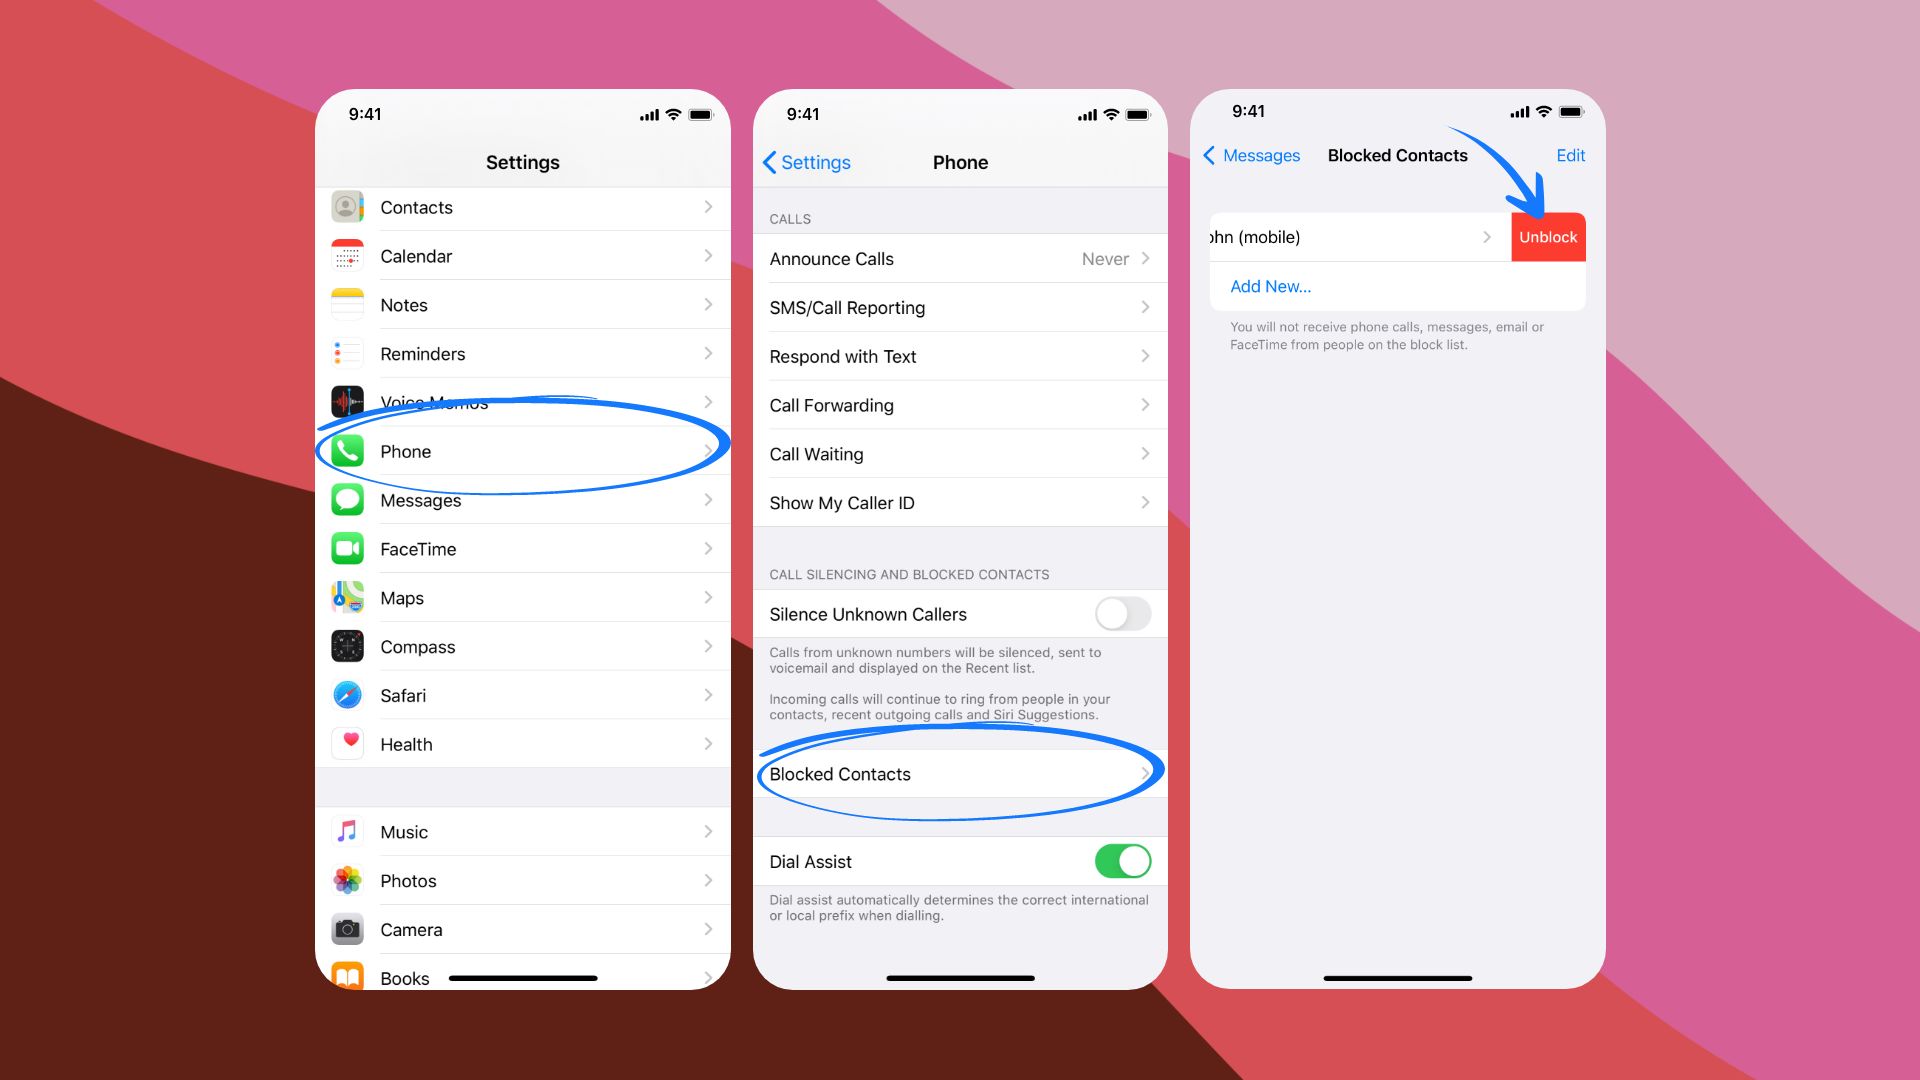 how to unblock a contact on iPhone